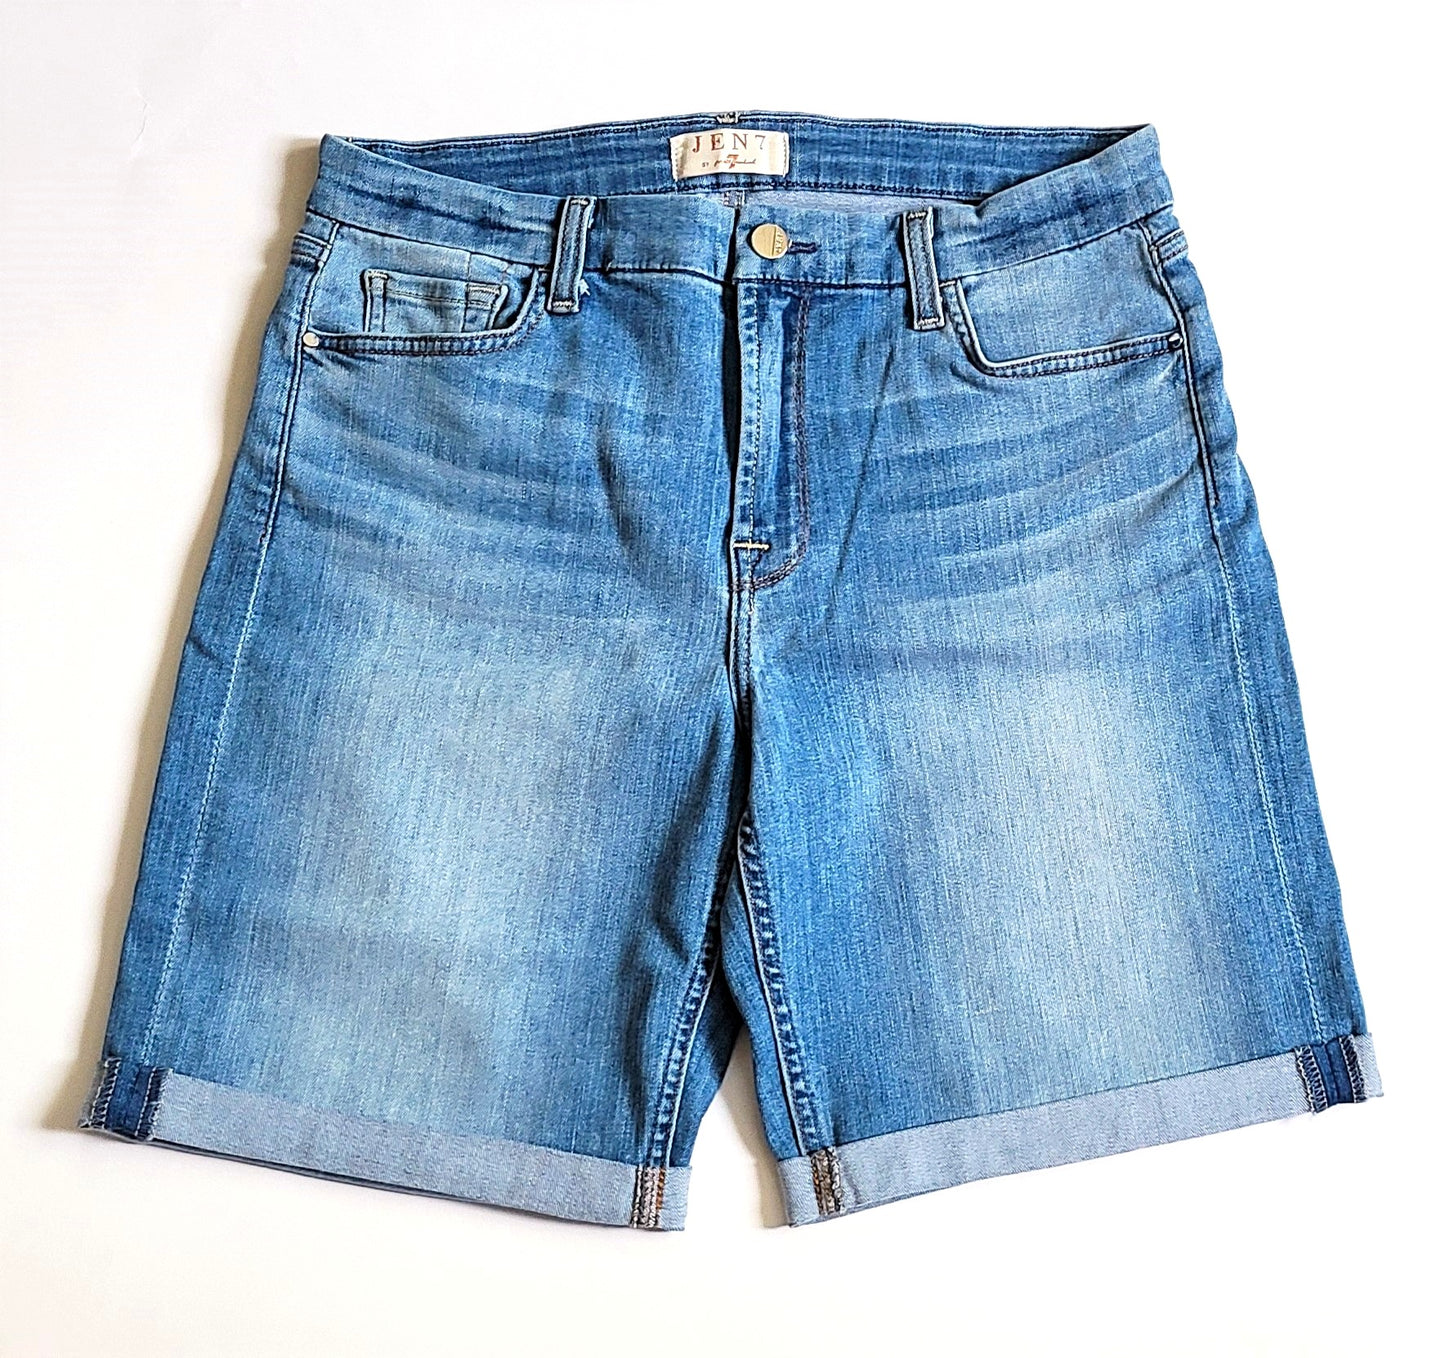 JEN7 by 7 For All Mankind's denim Bermuda shorts With Rolled Cuffs